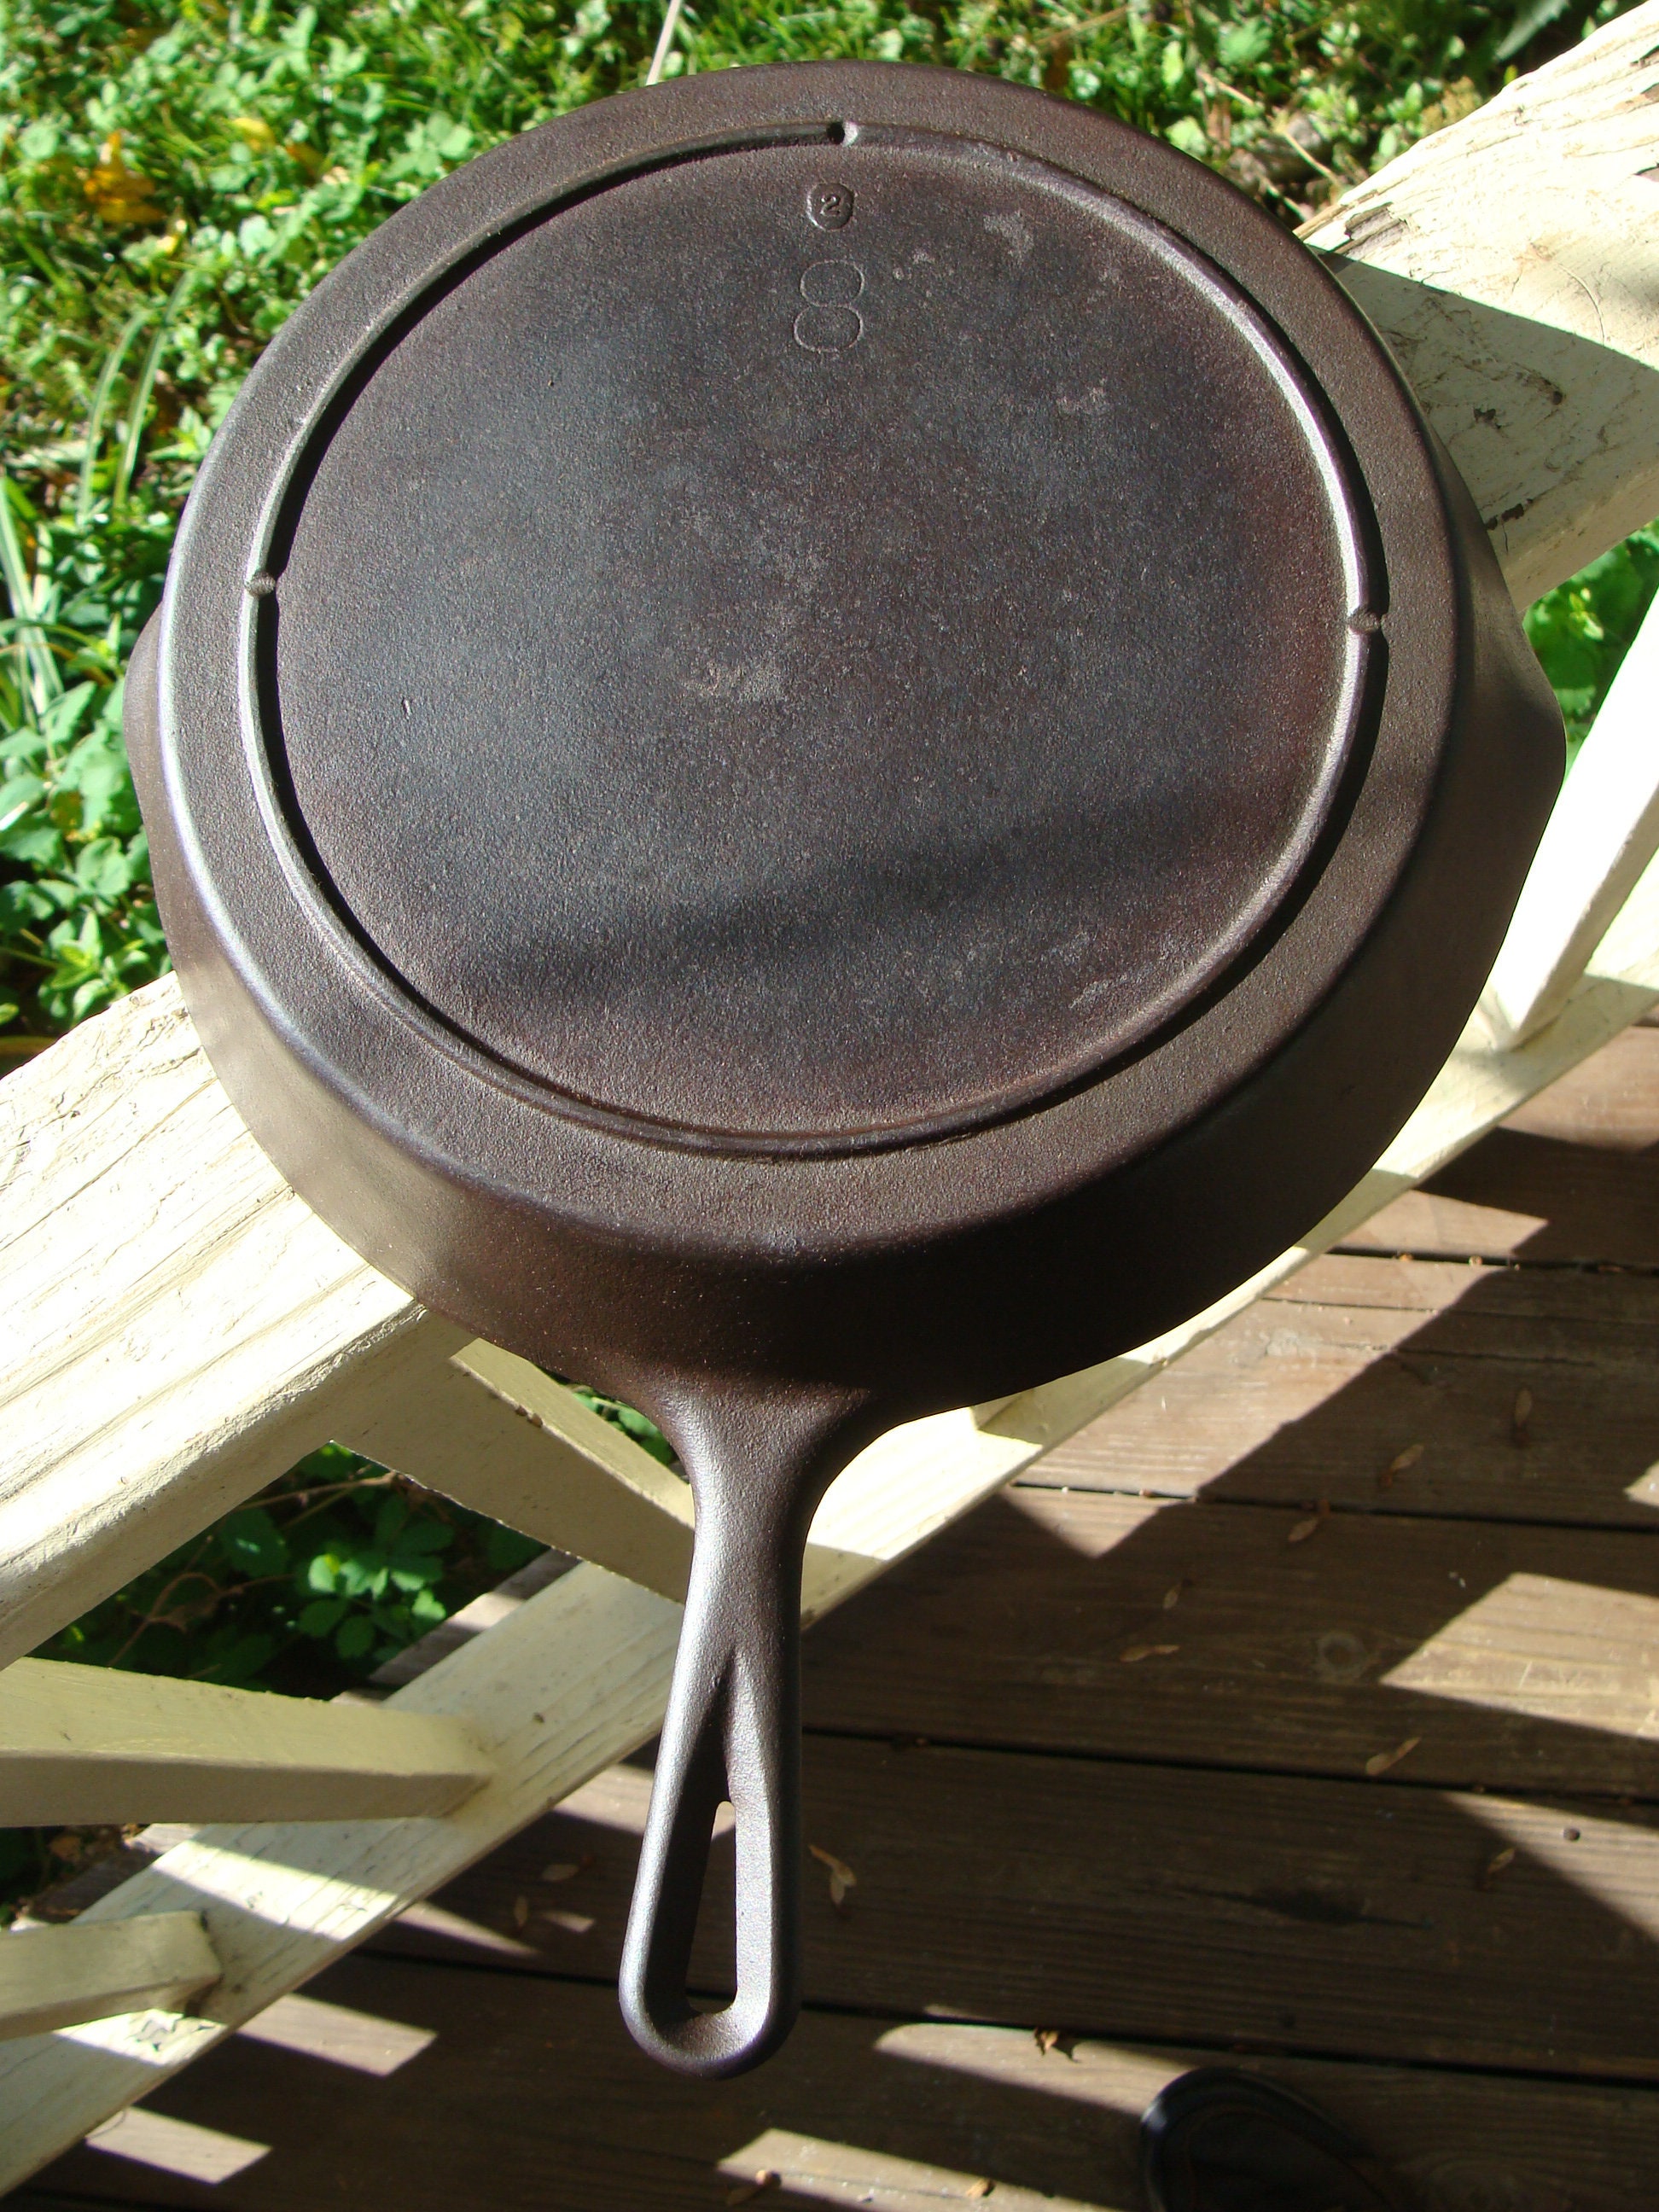 Vintage LODGE 3 Notch #14 Cast Iron Skillet 15 Inch Large Cook Ware Unmarked